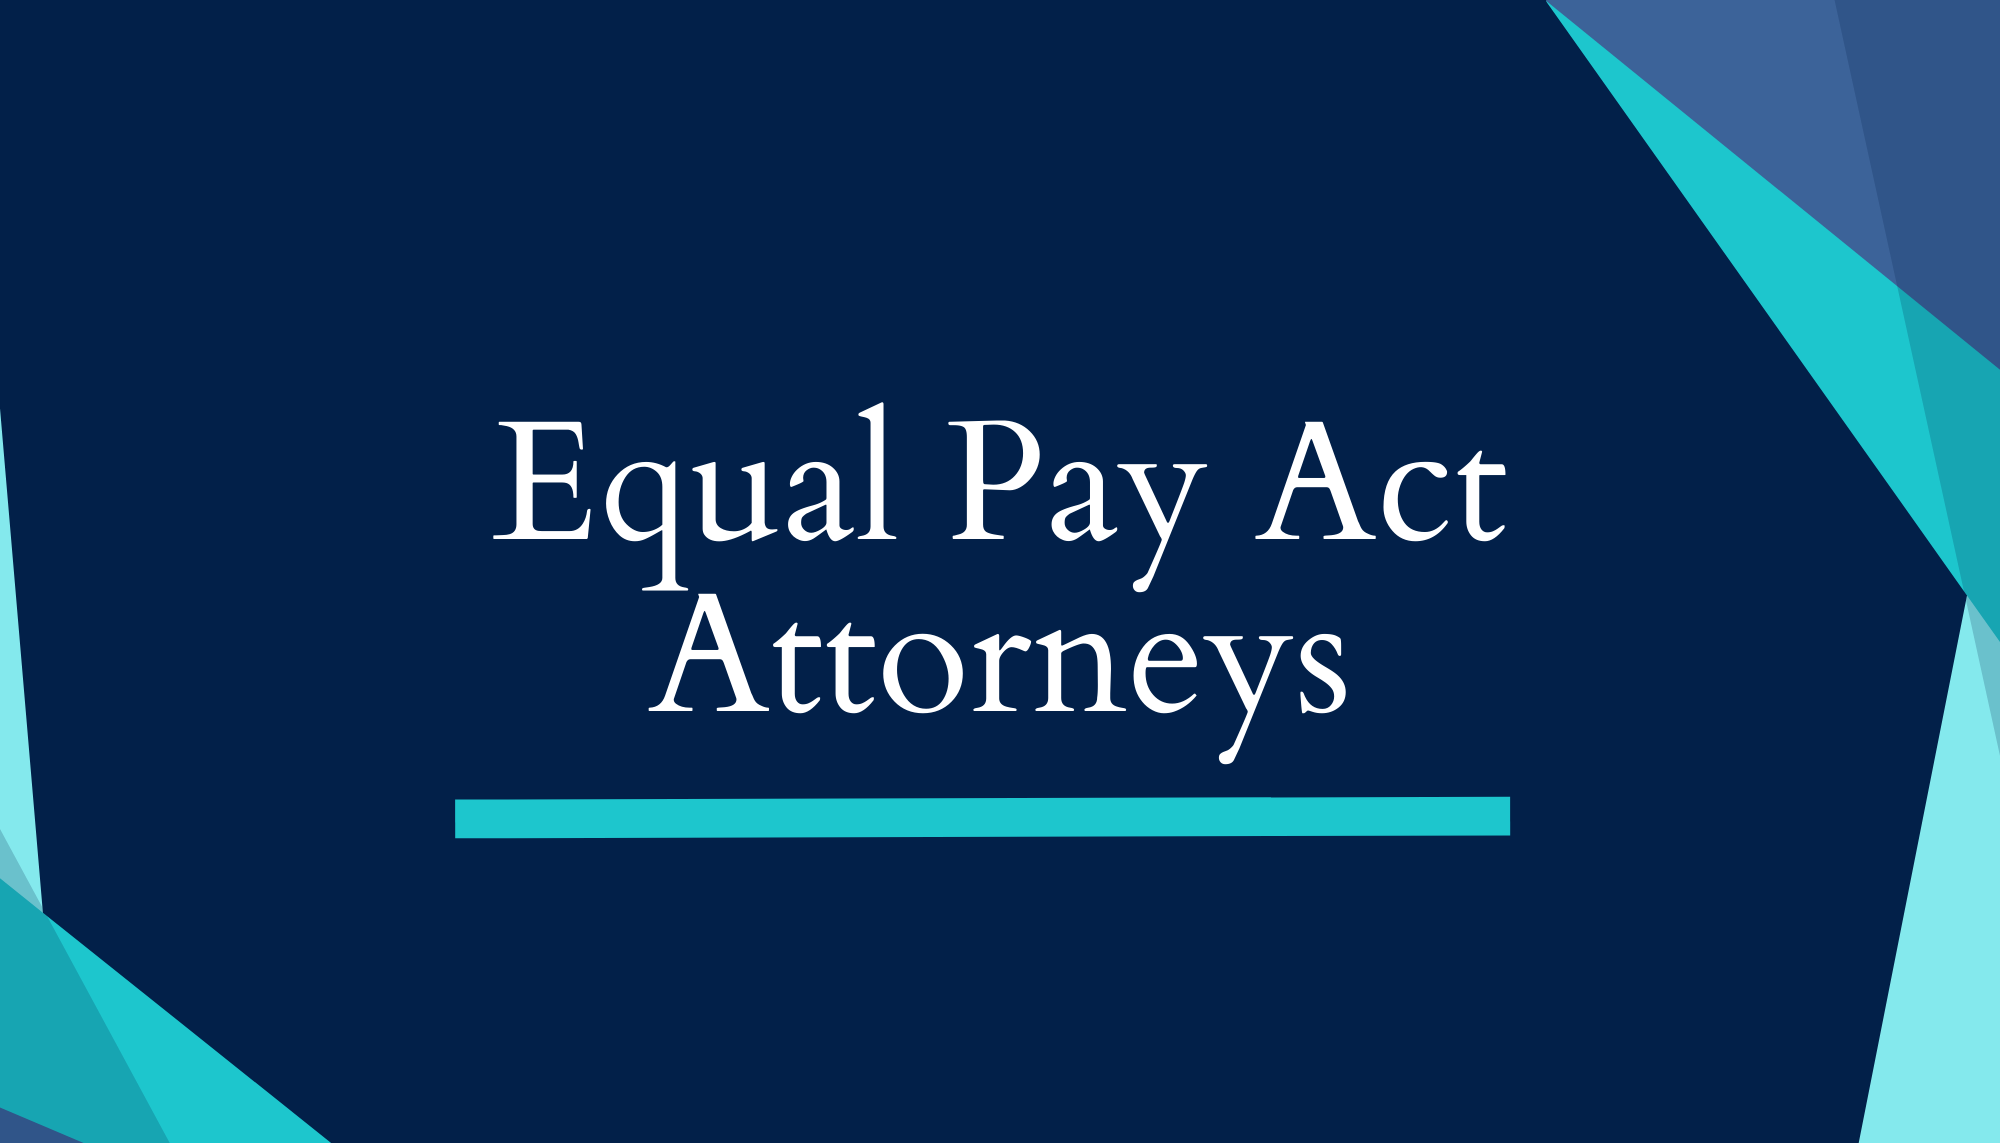 Equal Pay Act Attorneys